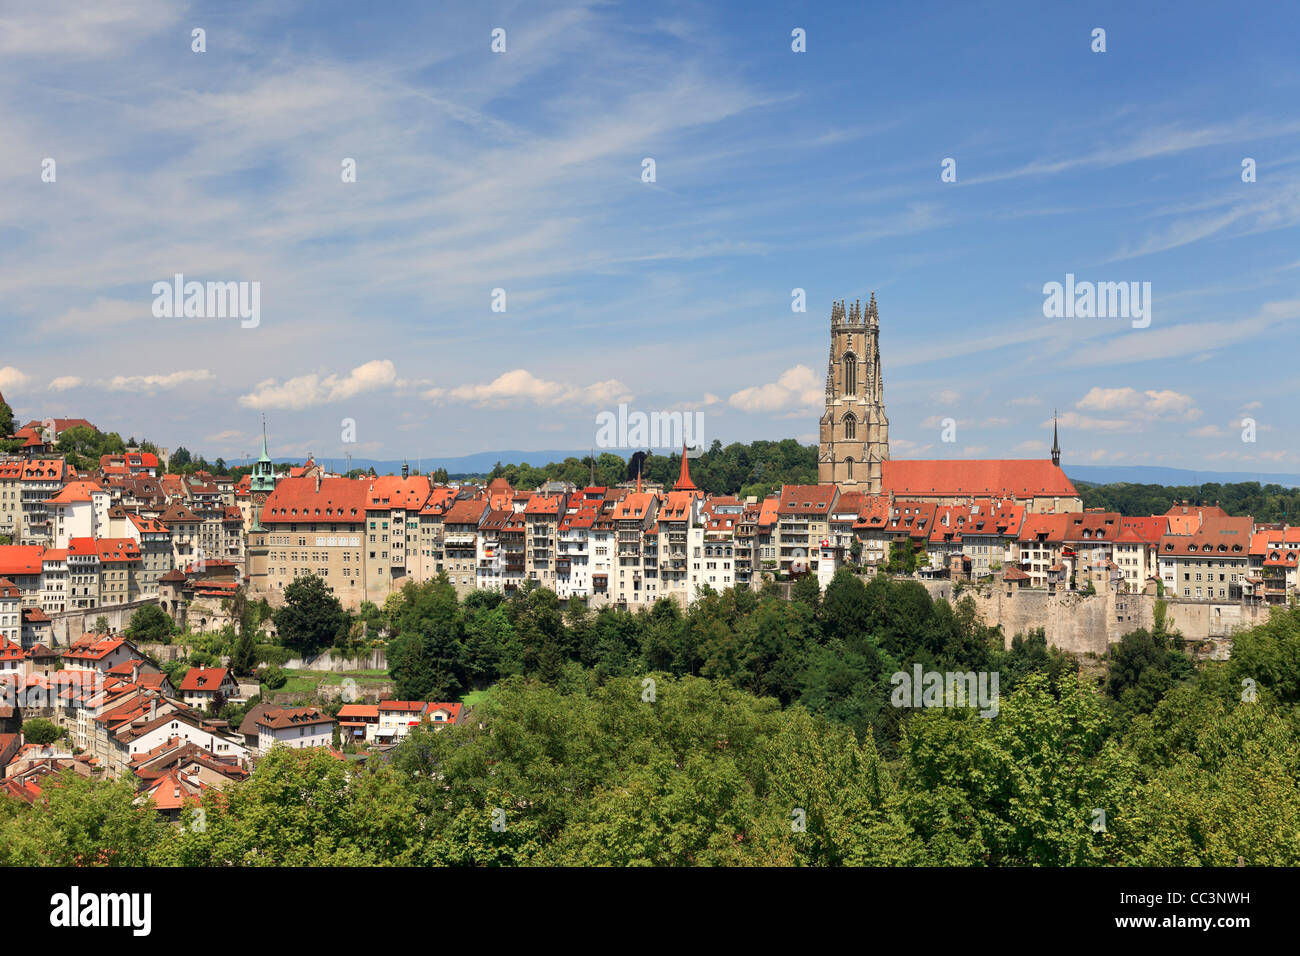 Switzerland, Fribourg, Old Town Stock Photo